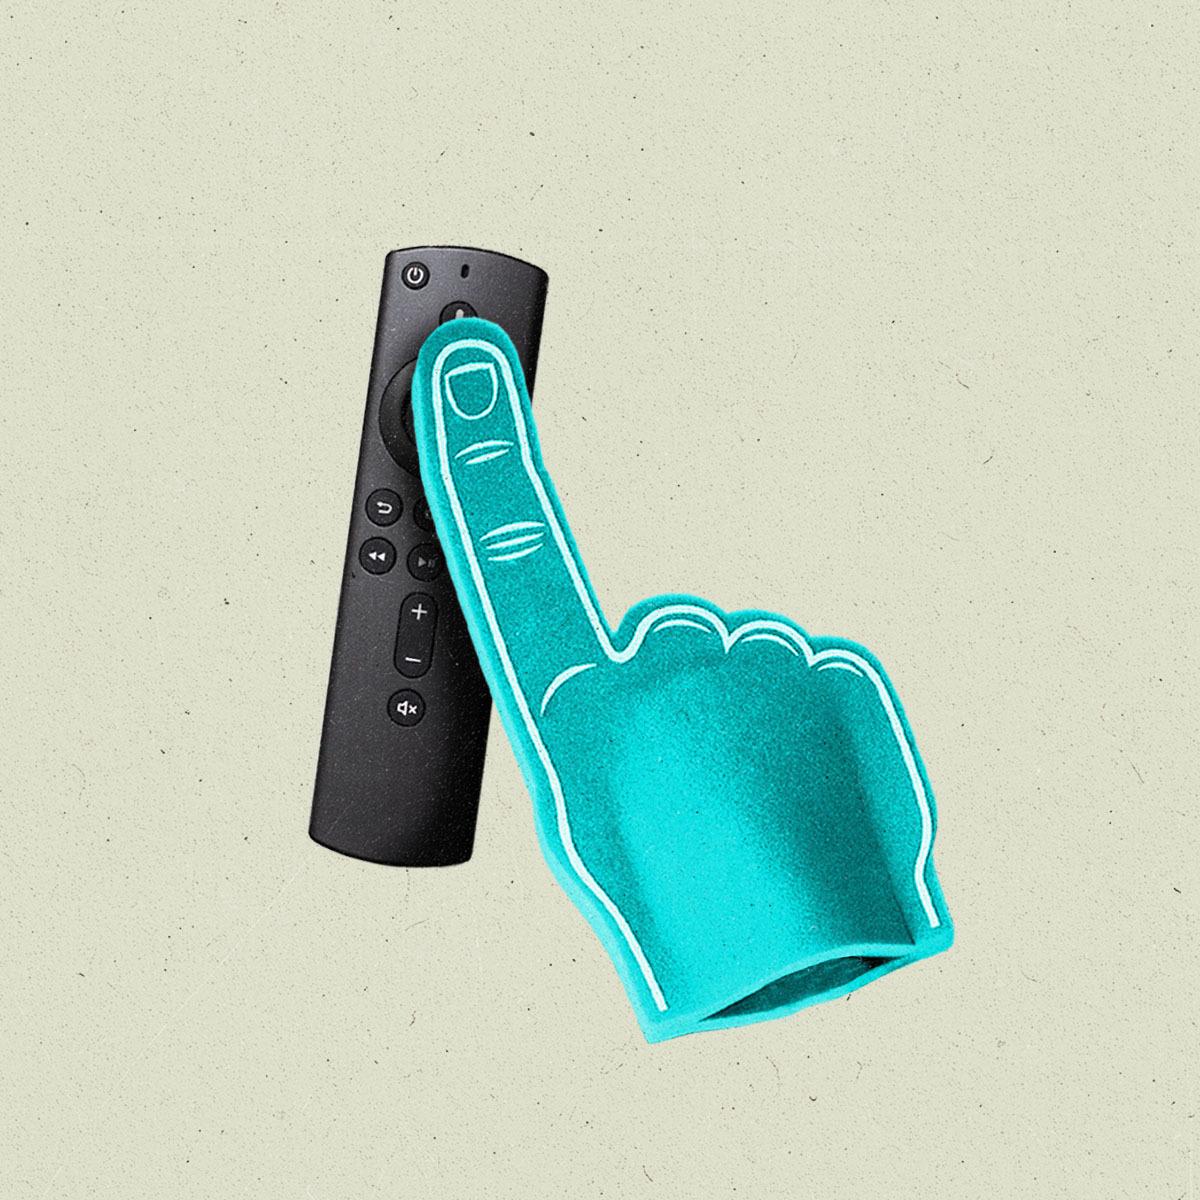 A bright turquoise colored foam finger presses the center button of a streaming service remote control.